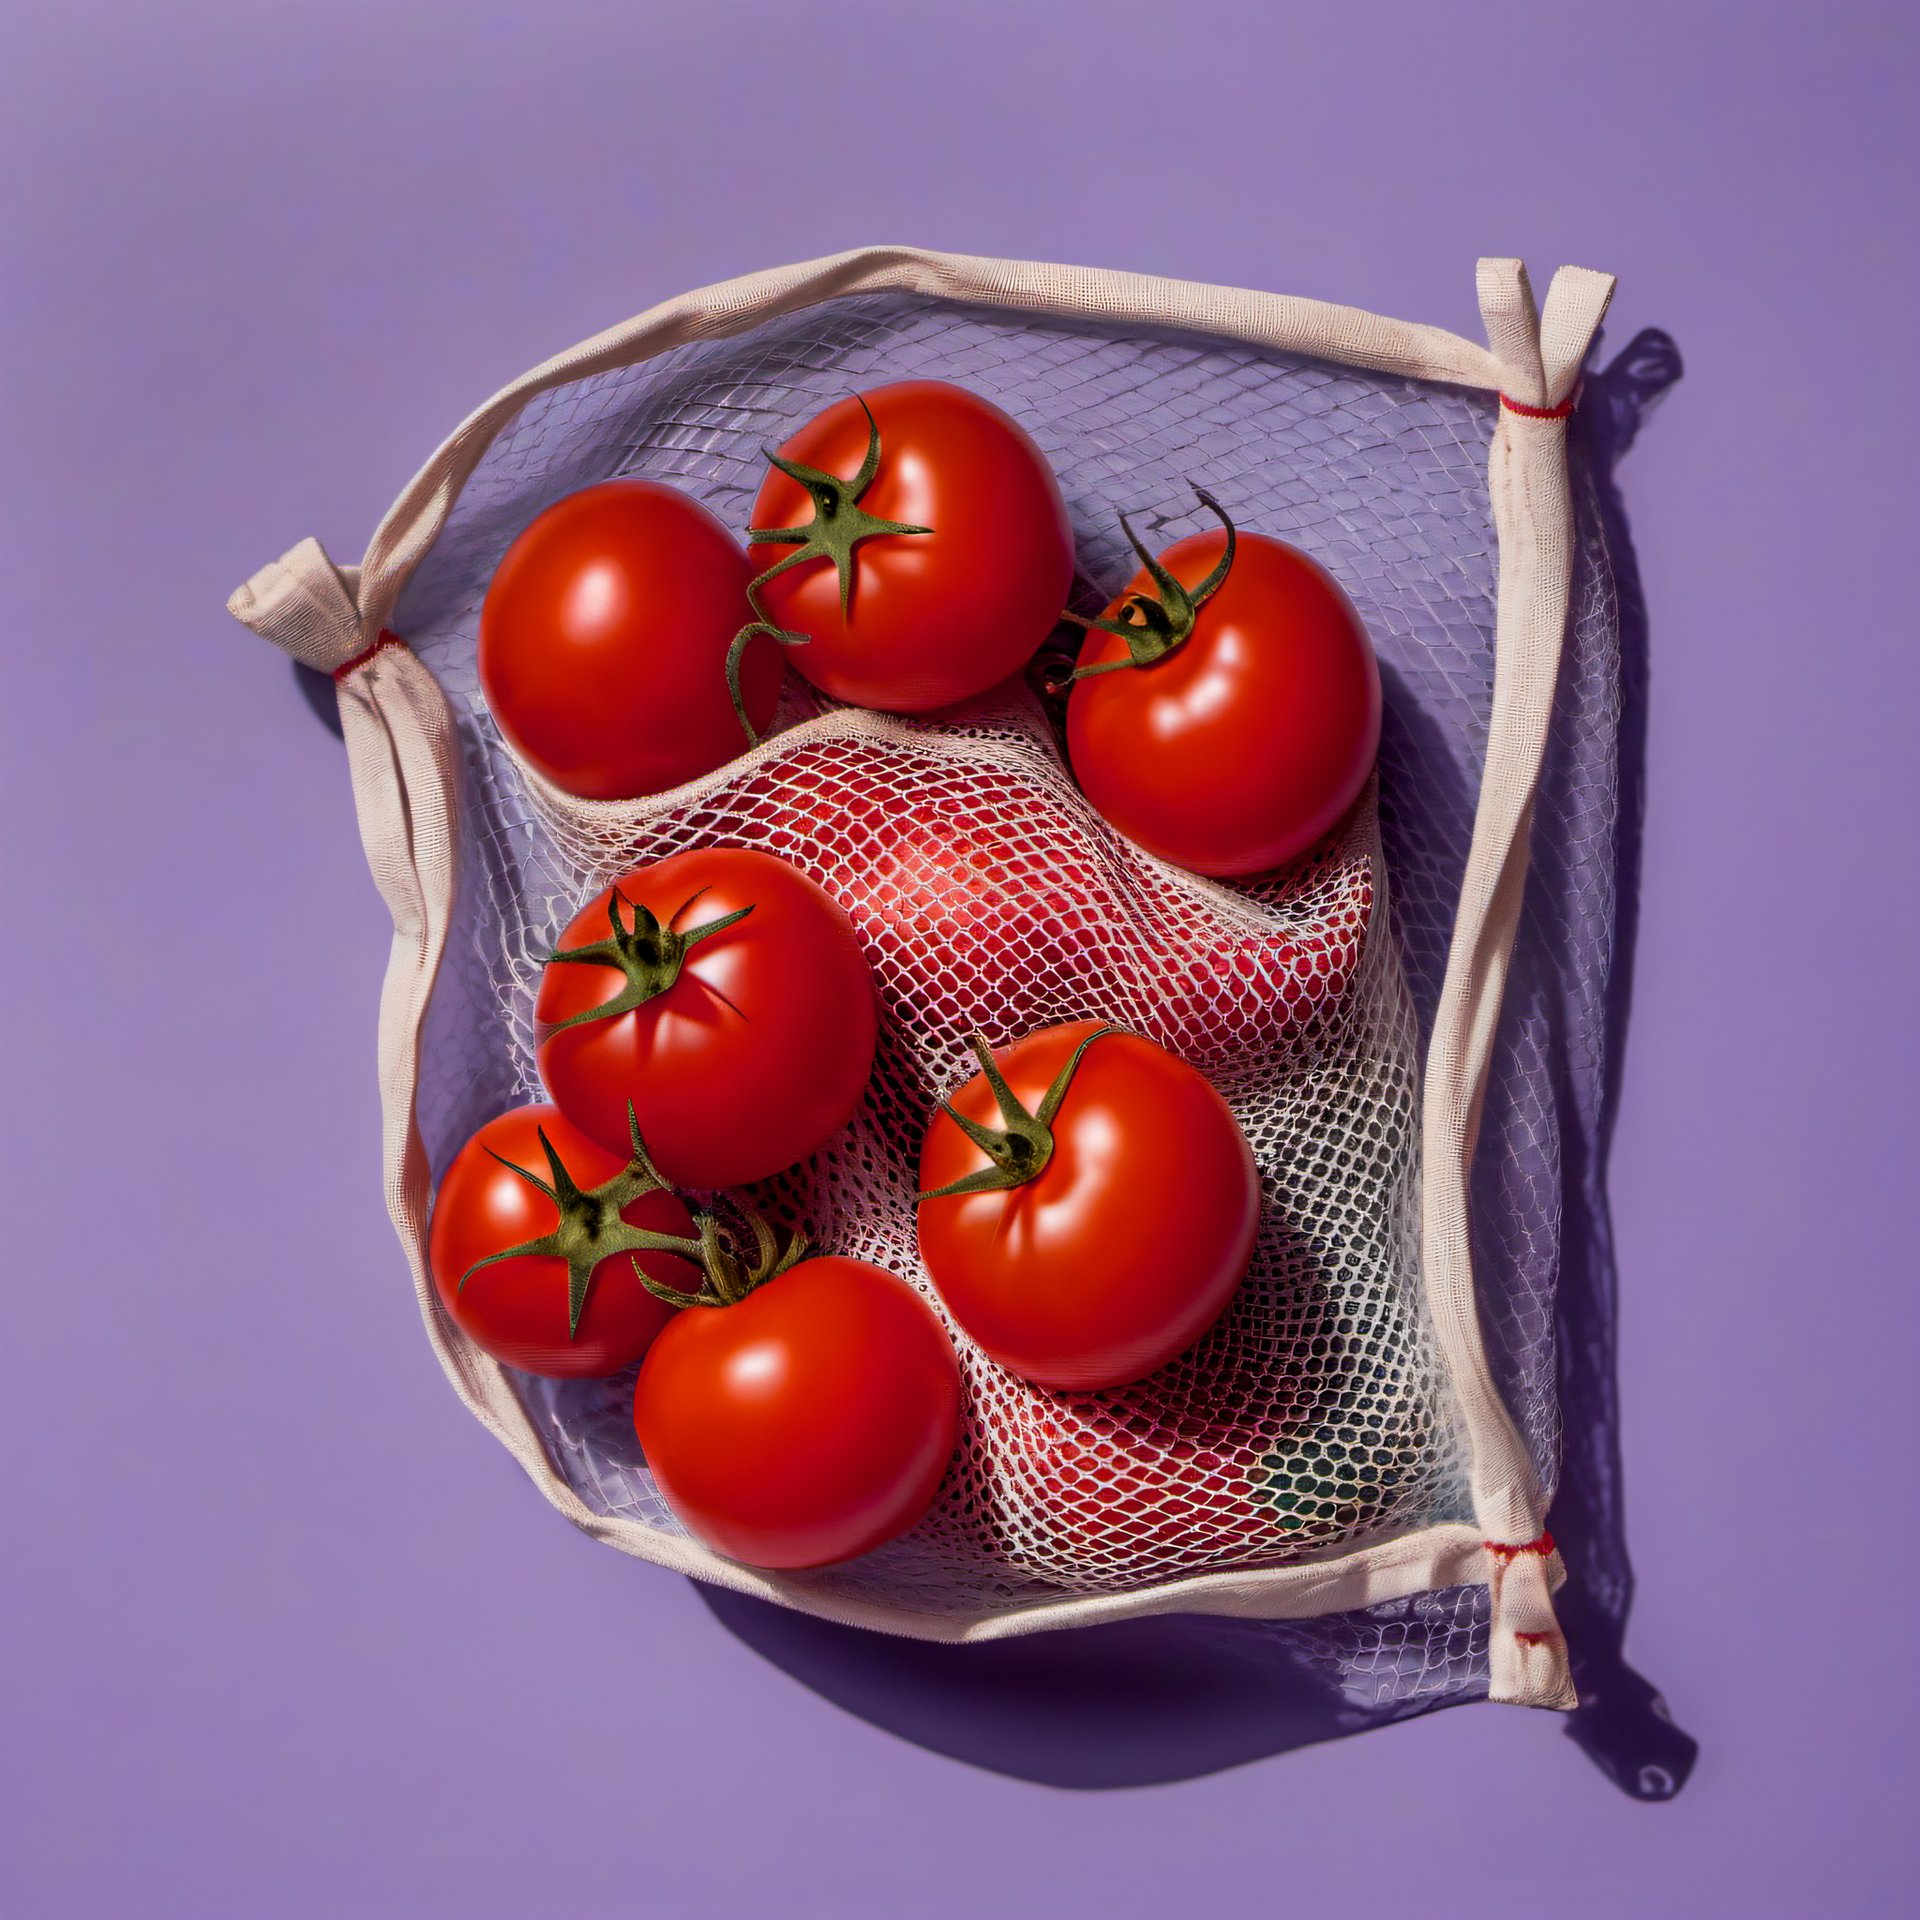 Tomatoes in a net bag